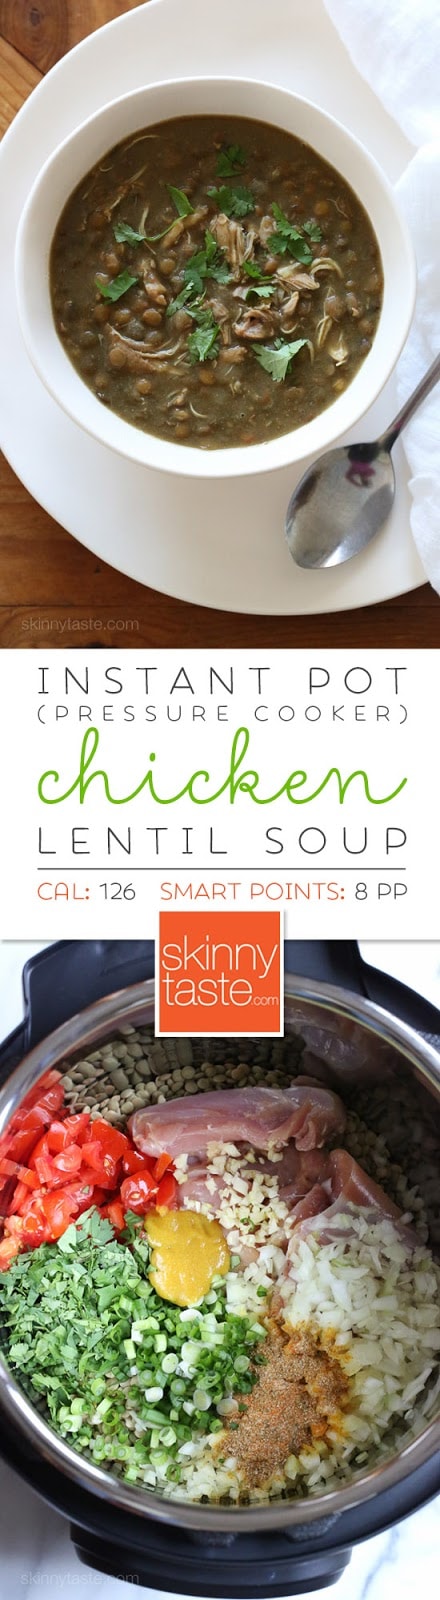 Instant Pot (Pressure Cooker) Chicken and Lentil Soup – This delicious soup is quick, and leftovers are freezer-friendly!